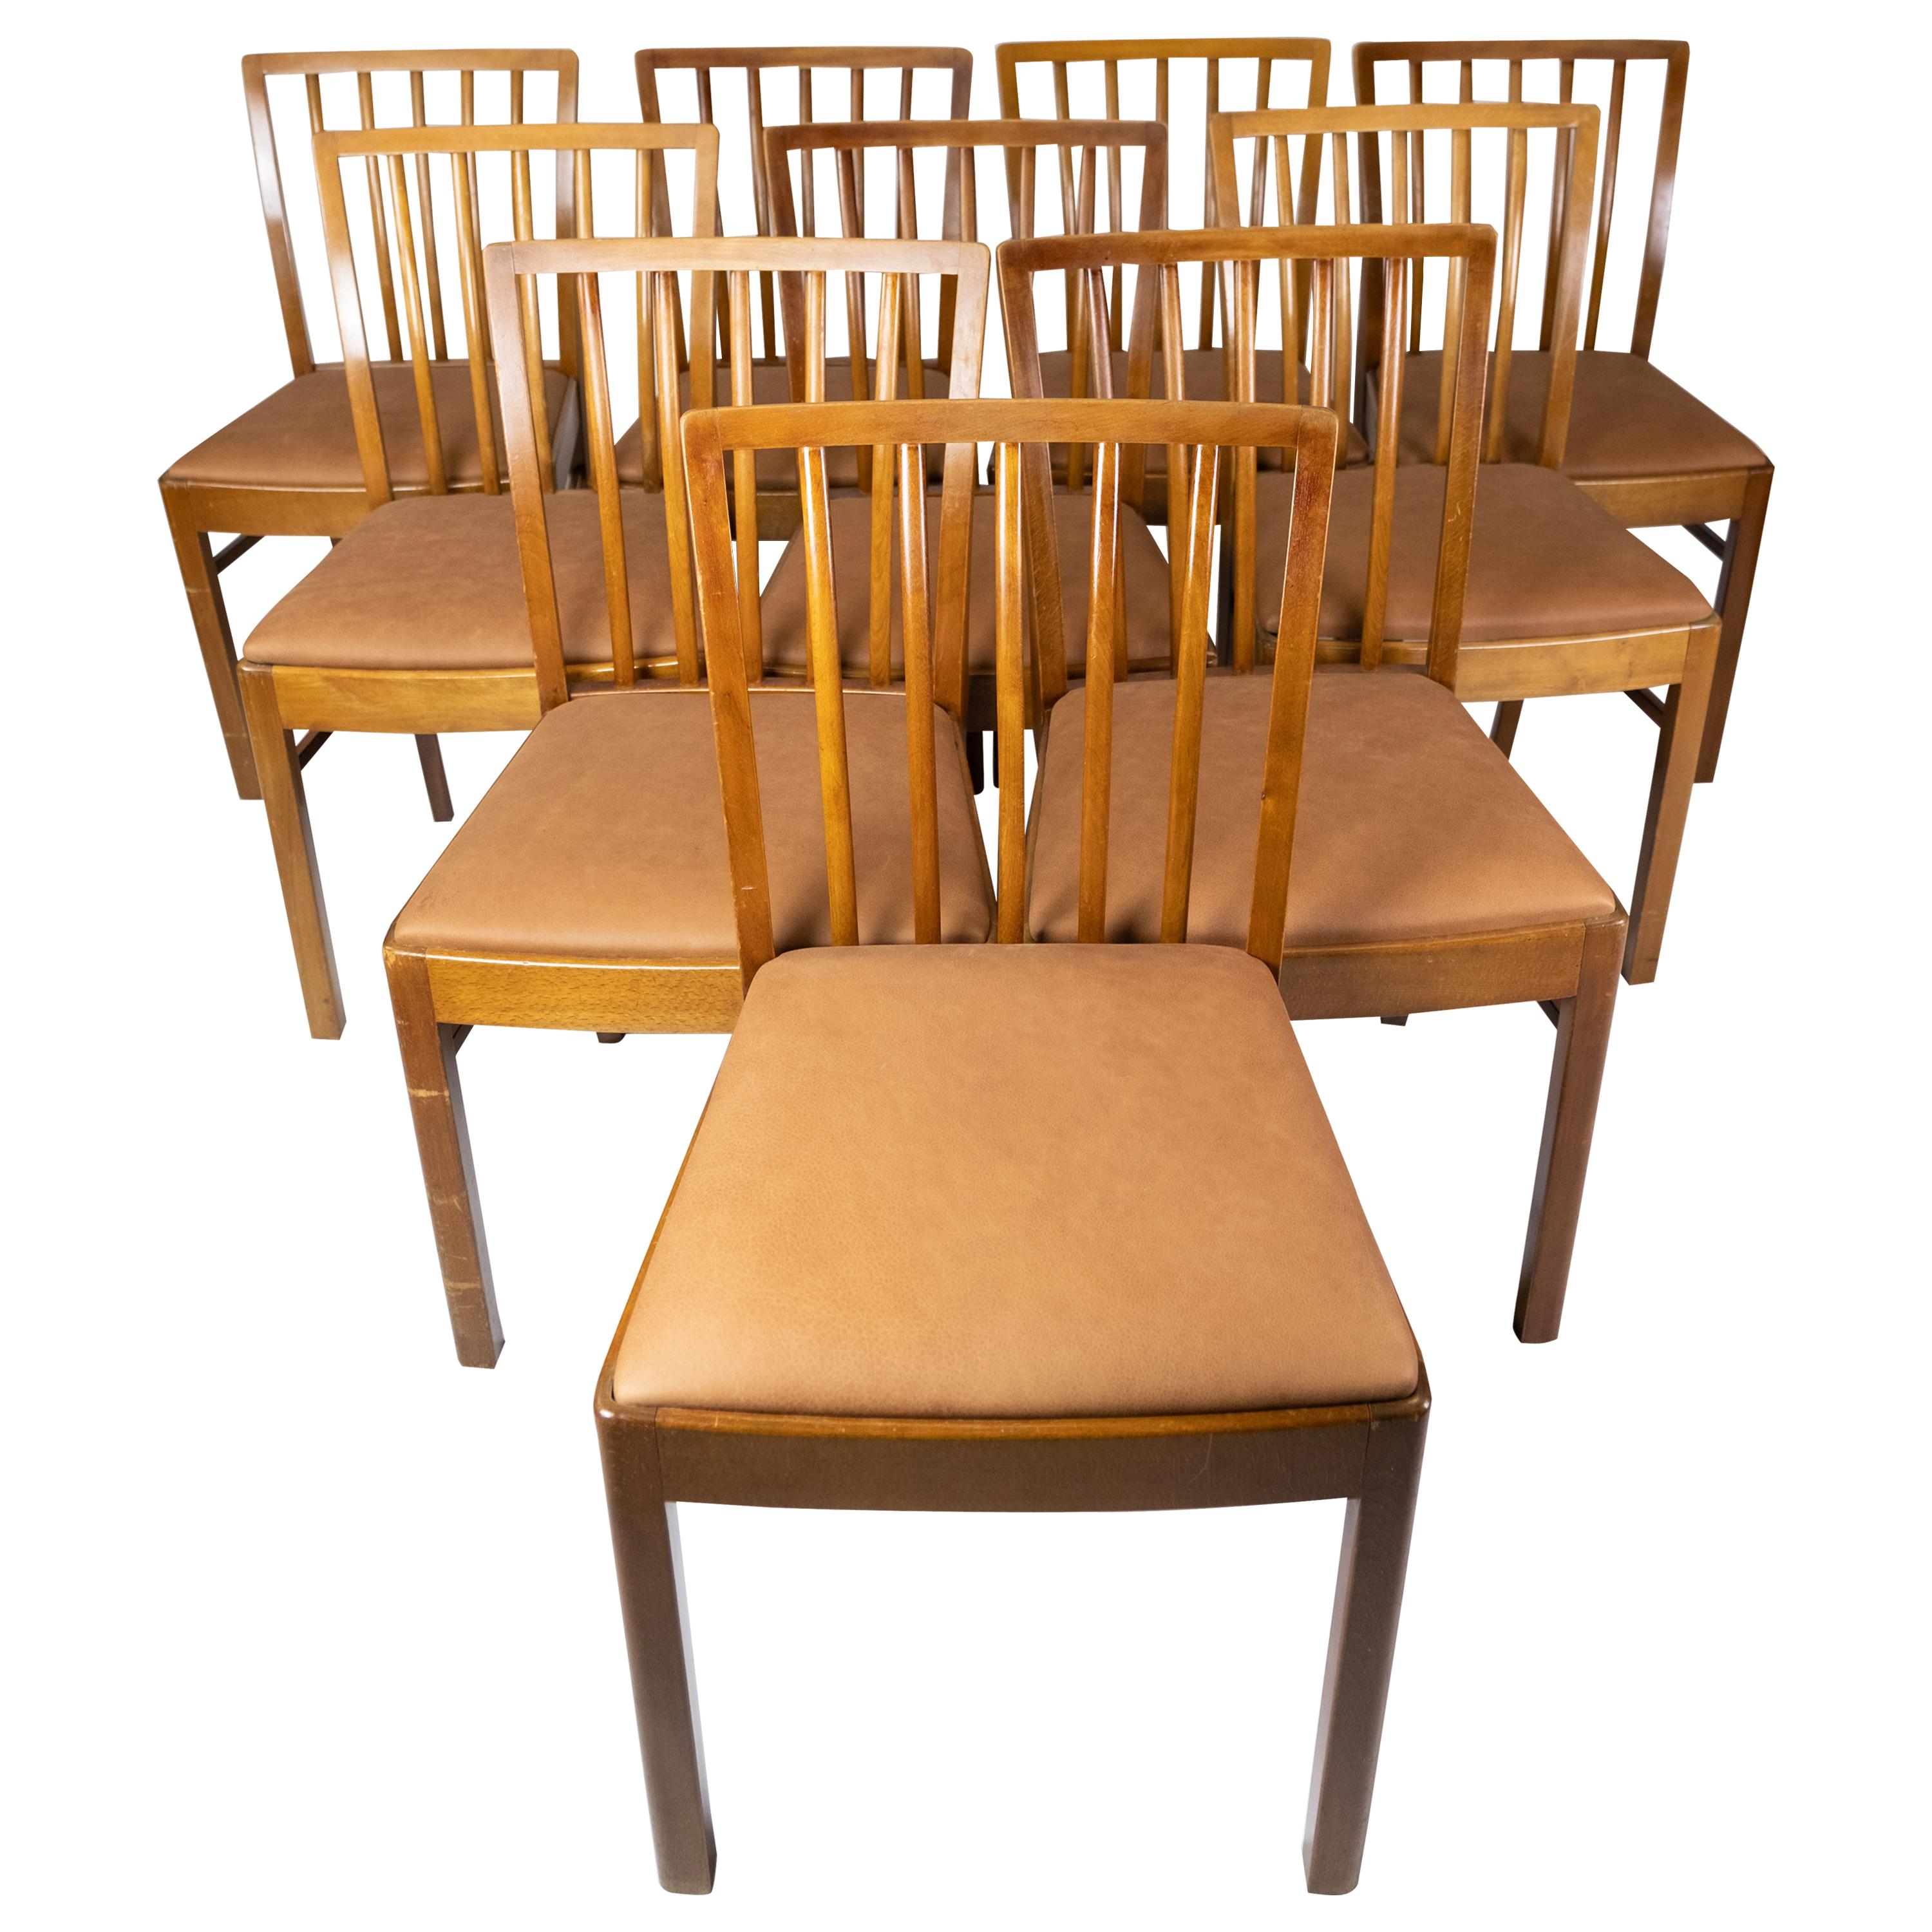 Art Deco Set of 10 Dining Room Chairs of Light Wood and Cognac Leather, 1940s For Sale